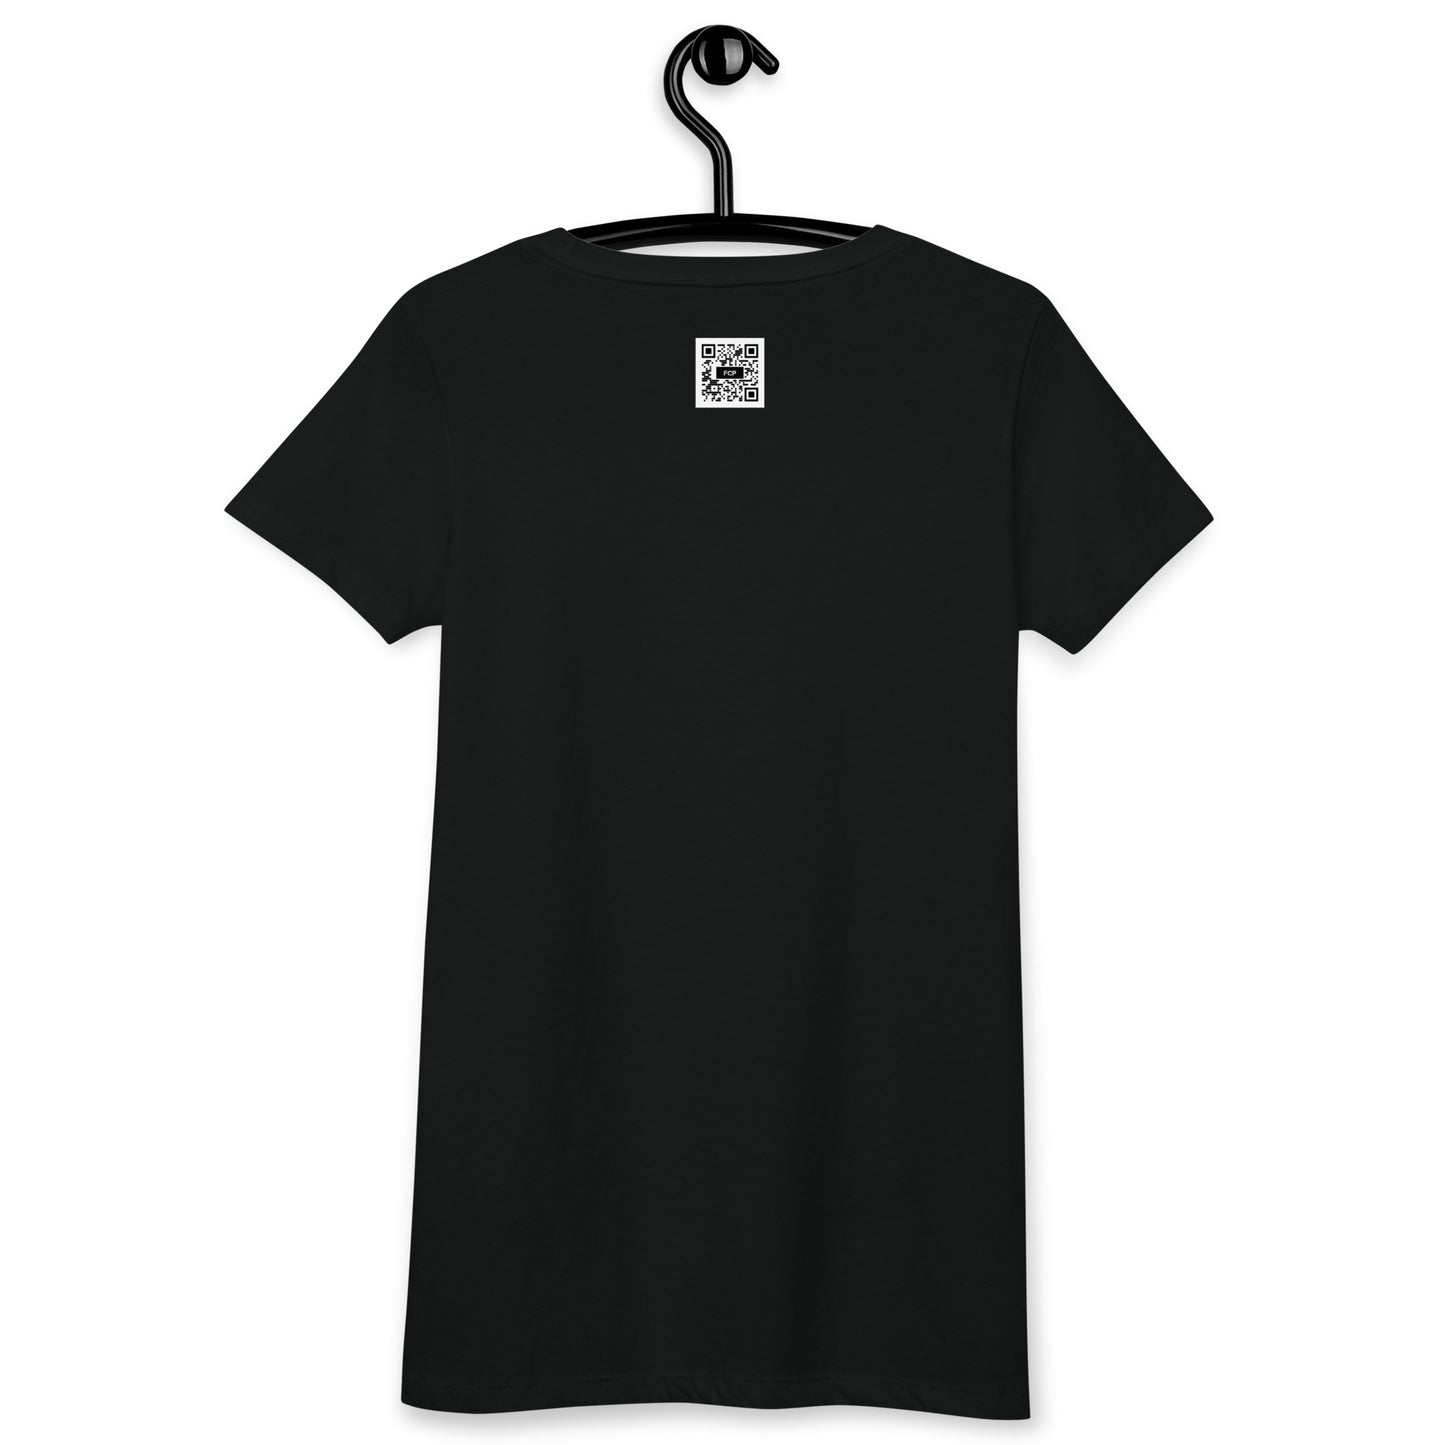 Women’s FCP Arch Logo Fitted T-Shirt